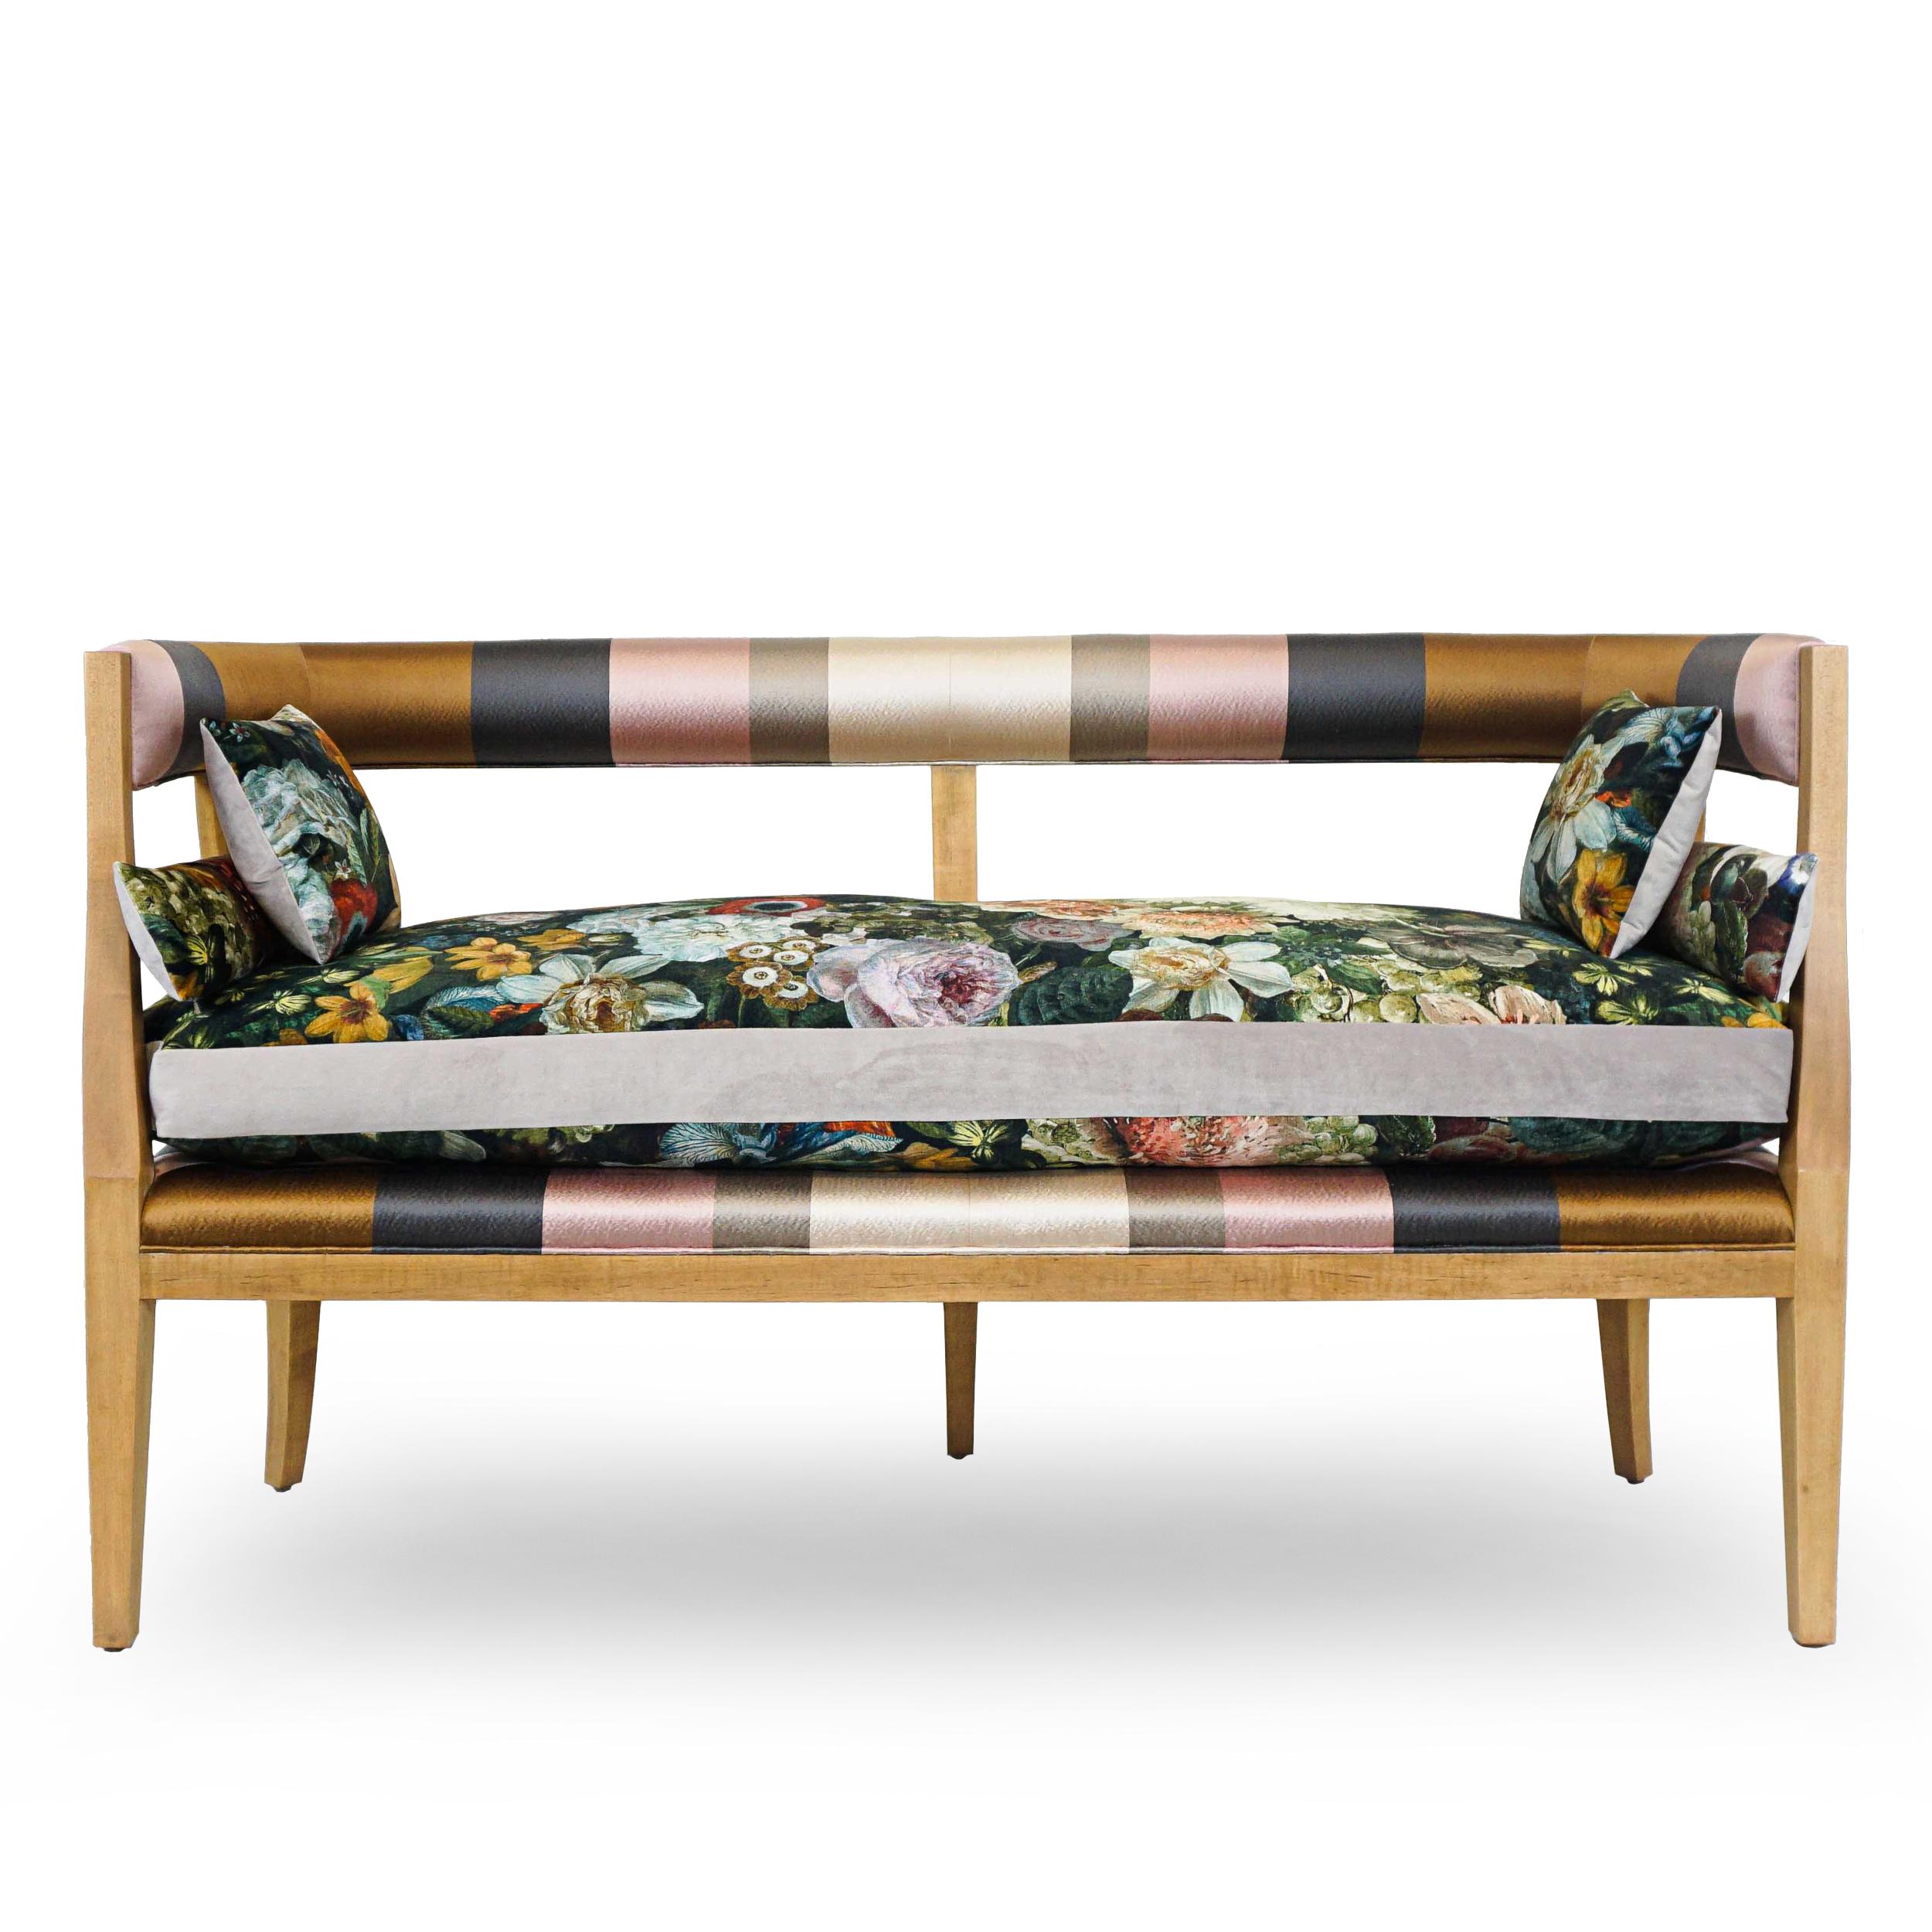 japanese style bench seat